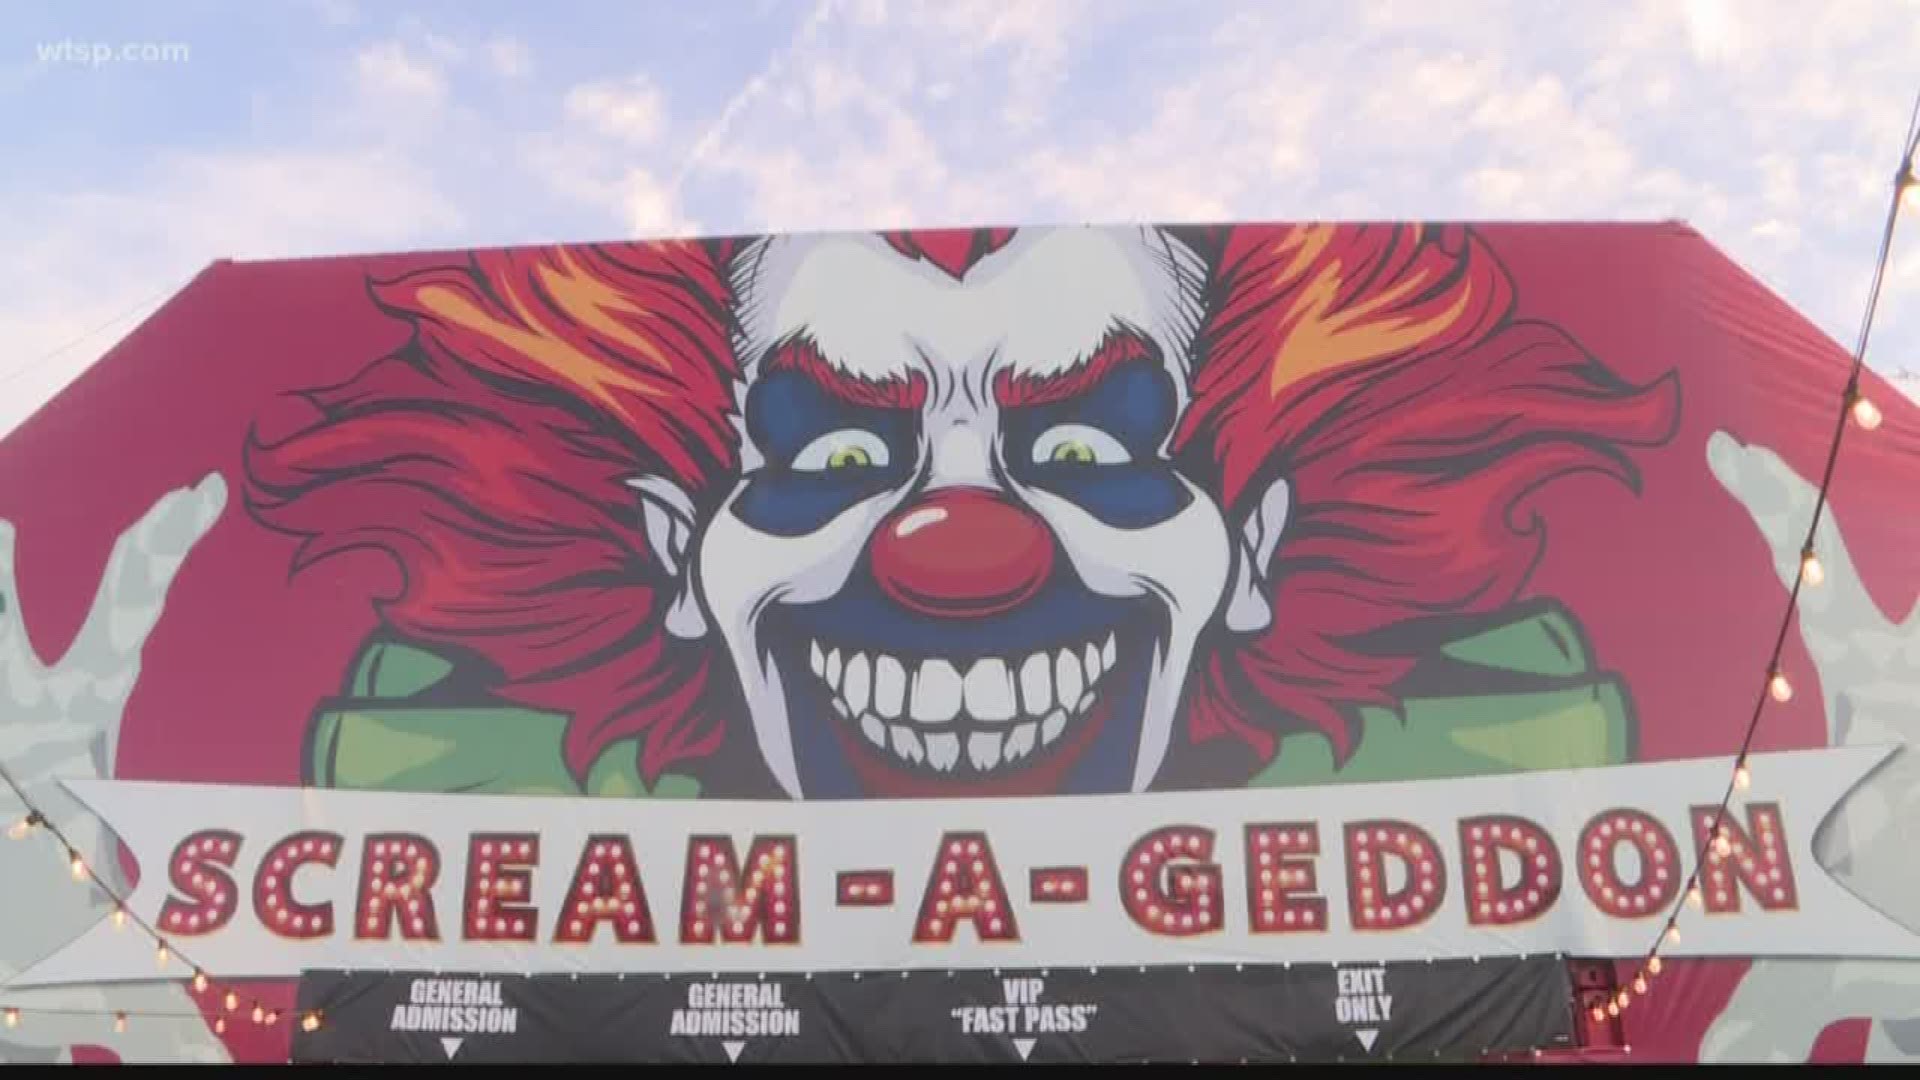 If you’re in Dade City and you hear people screaming, don’t be too alarmed.

Scream-A-Geddon, the Halloween attraction, is back for its fifth year. The seasonal experience includes six interactive haunted houses, games and rides meant to terrify and entertain guests.